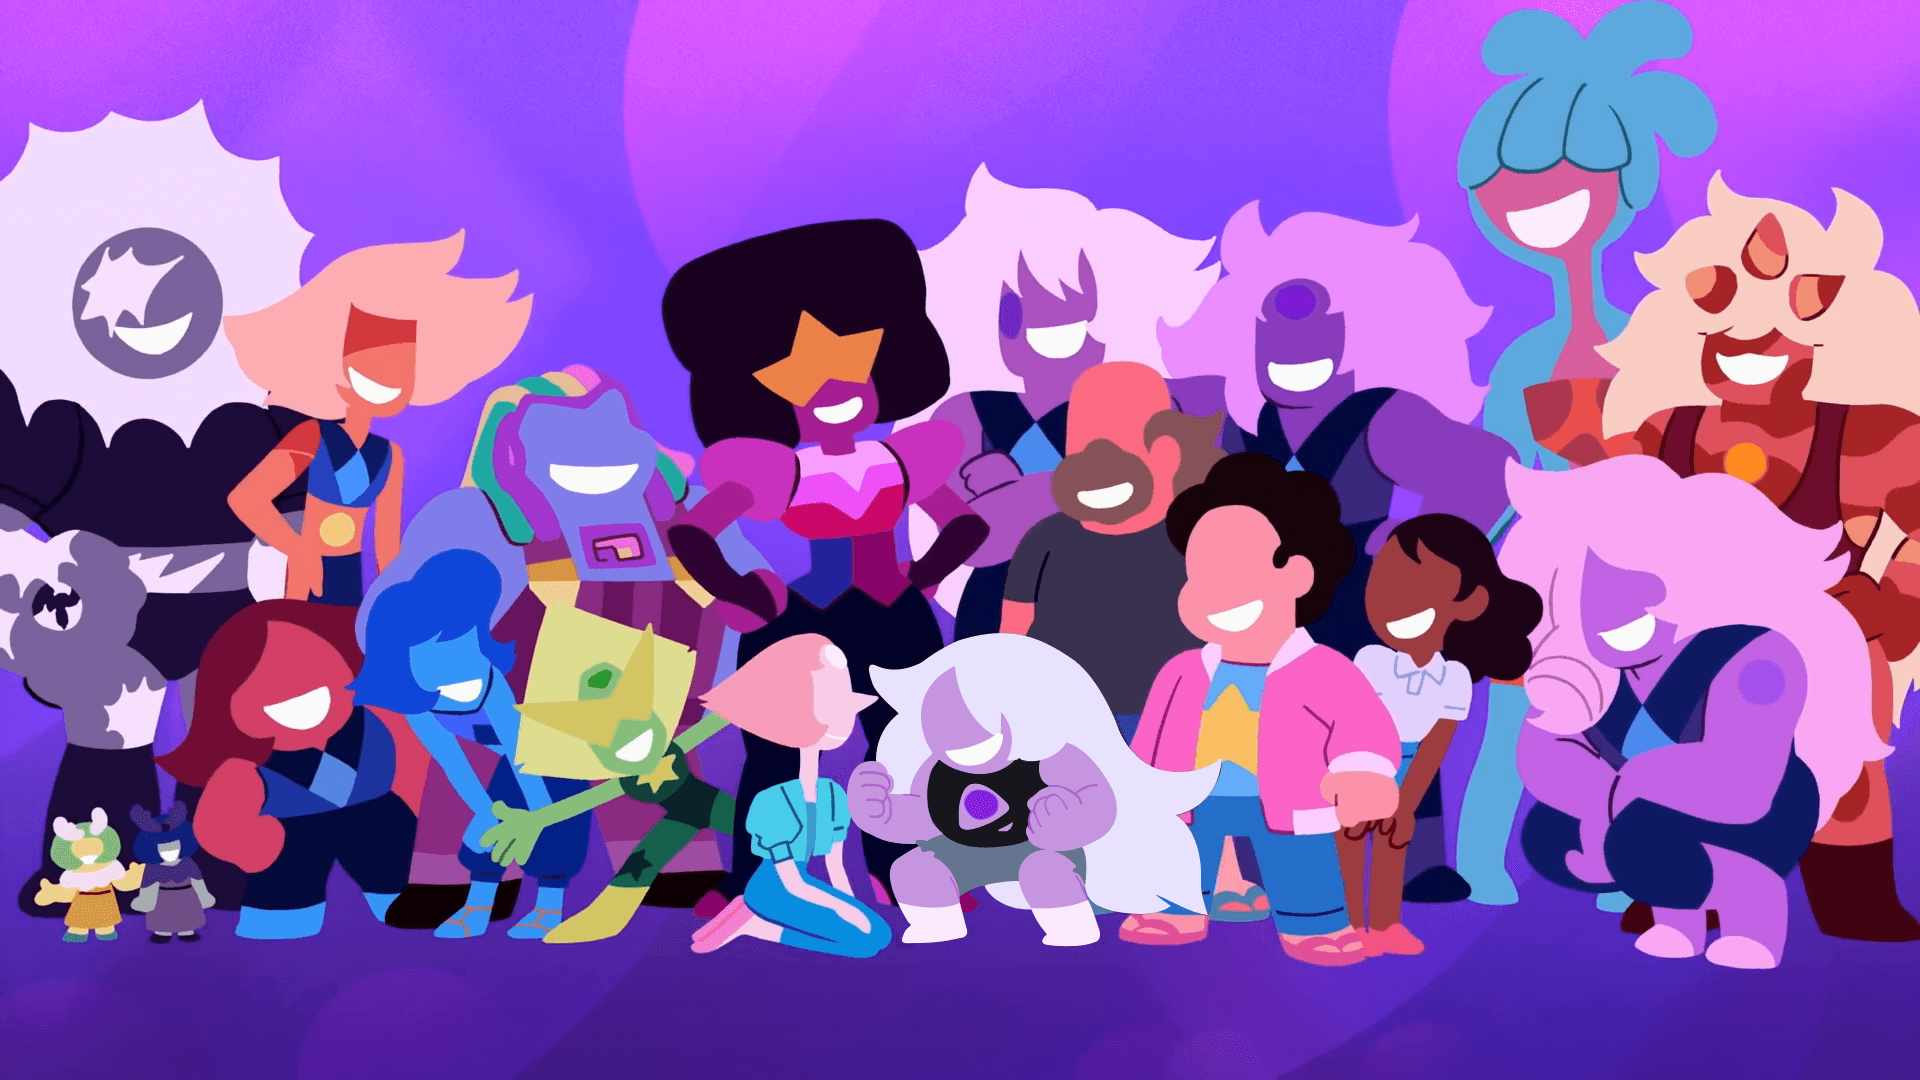 Redrew Amethyst in the style of the others for a wallpaper